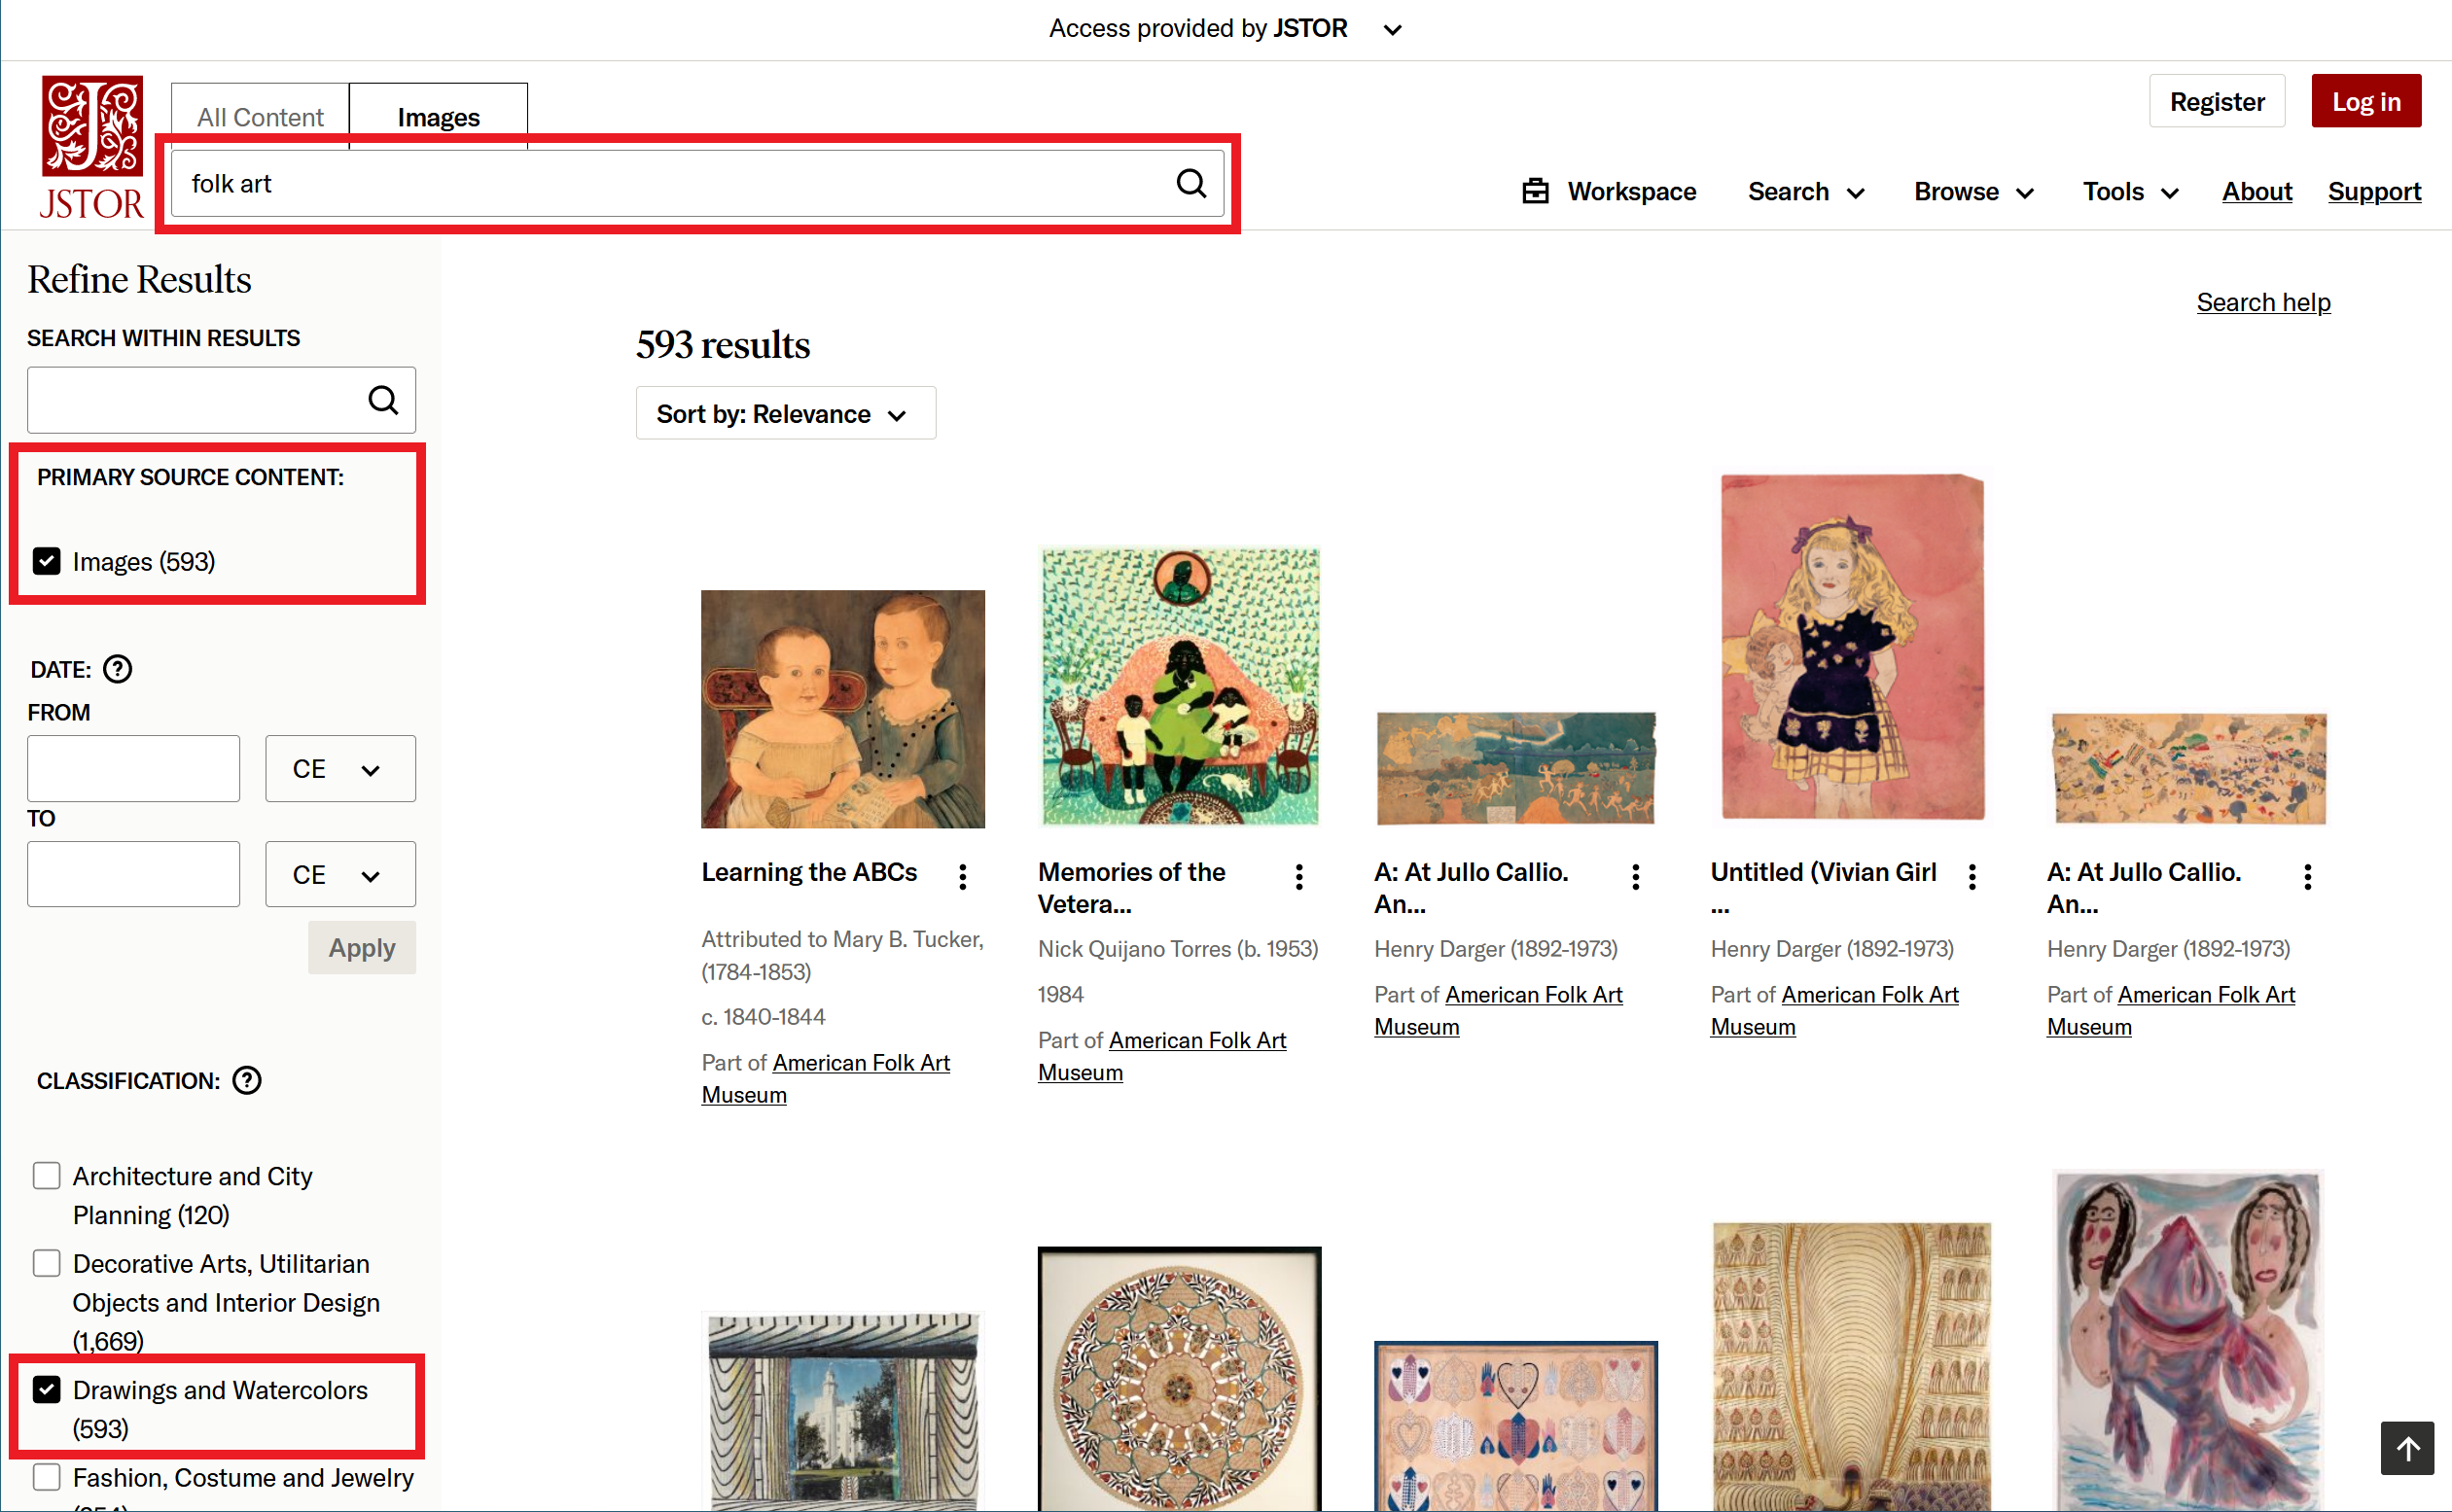 Example of image results for folk art filtered by classification of drawings and watercolors